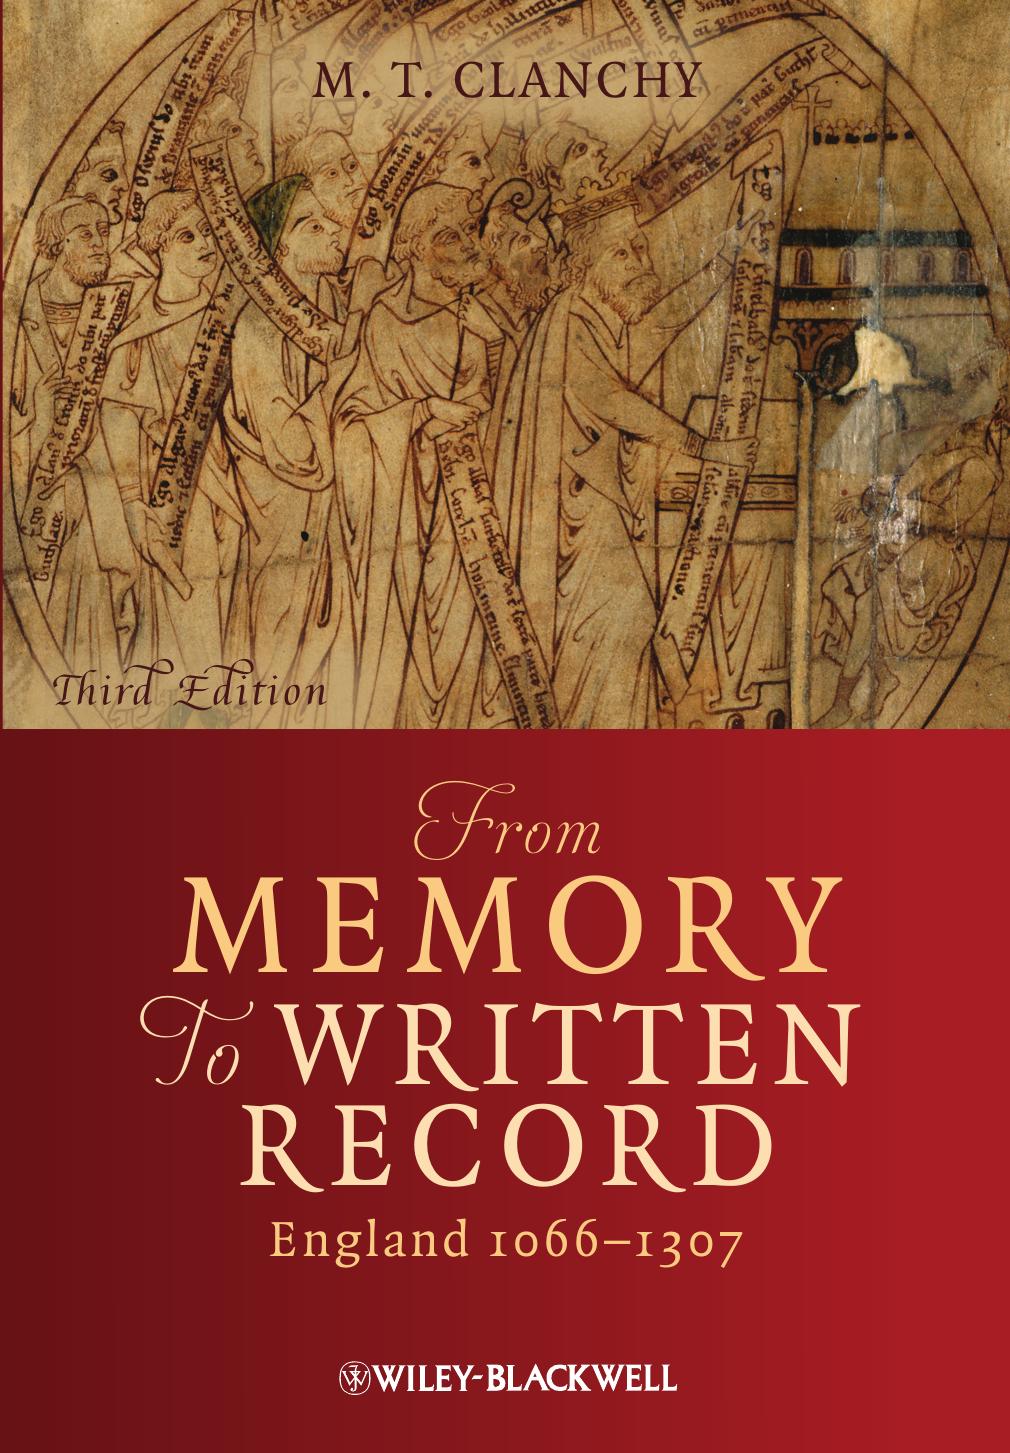 From Memory to Written Record: England 1066 - 1307